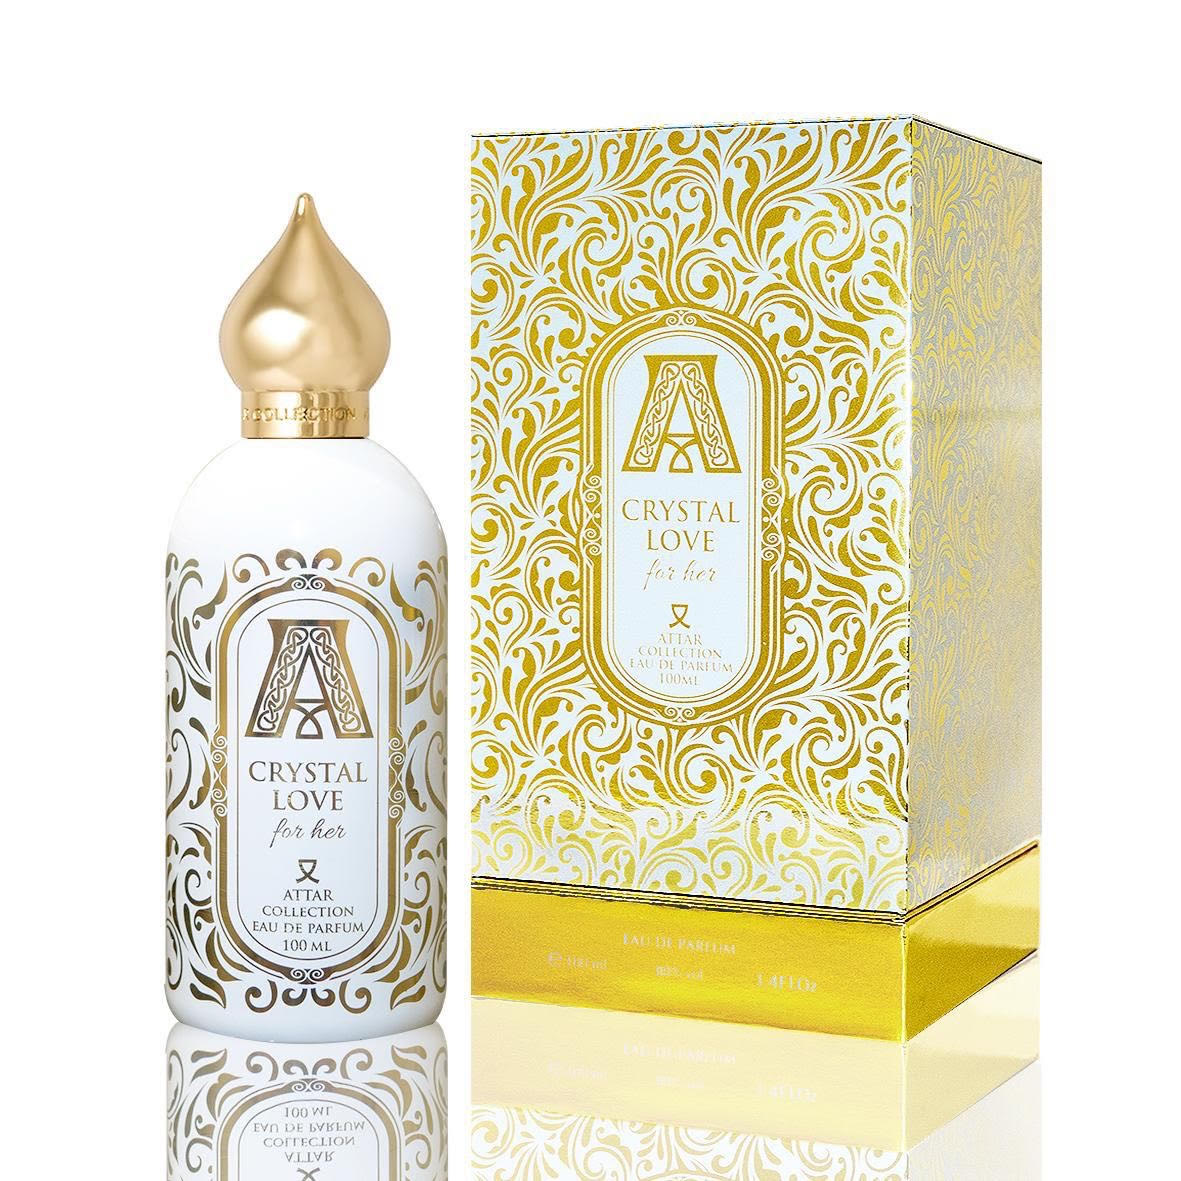 Attar Collection - Crystal Love for her